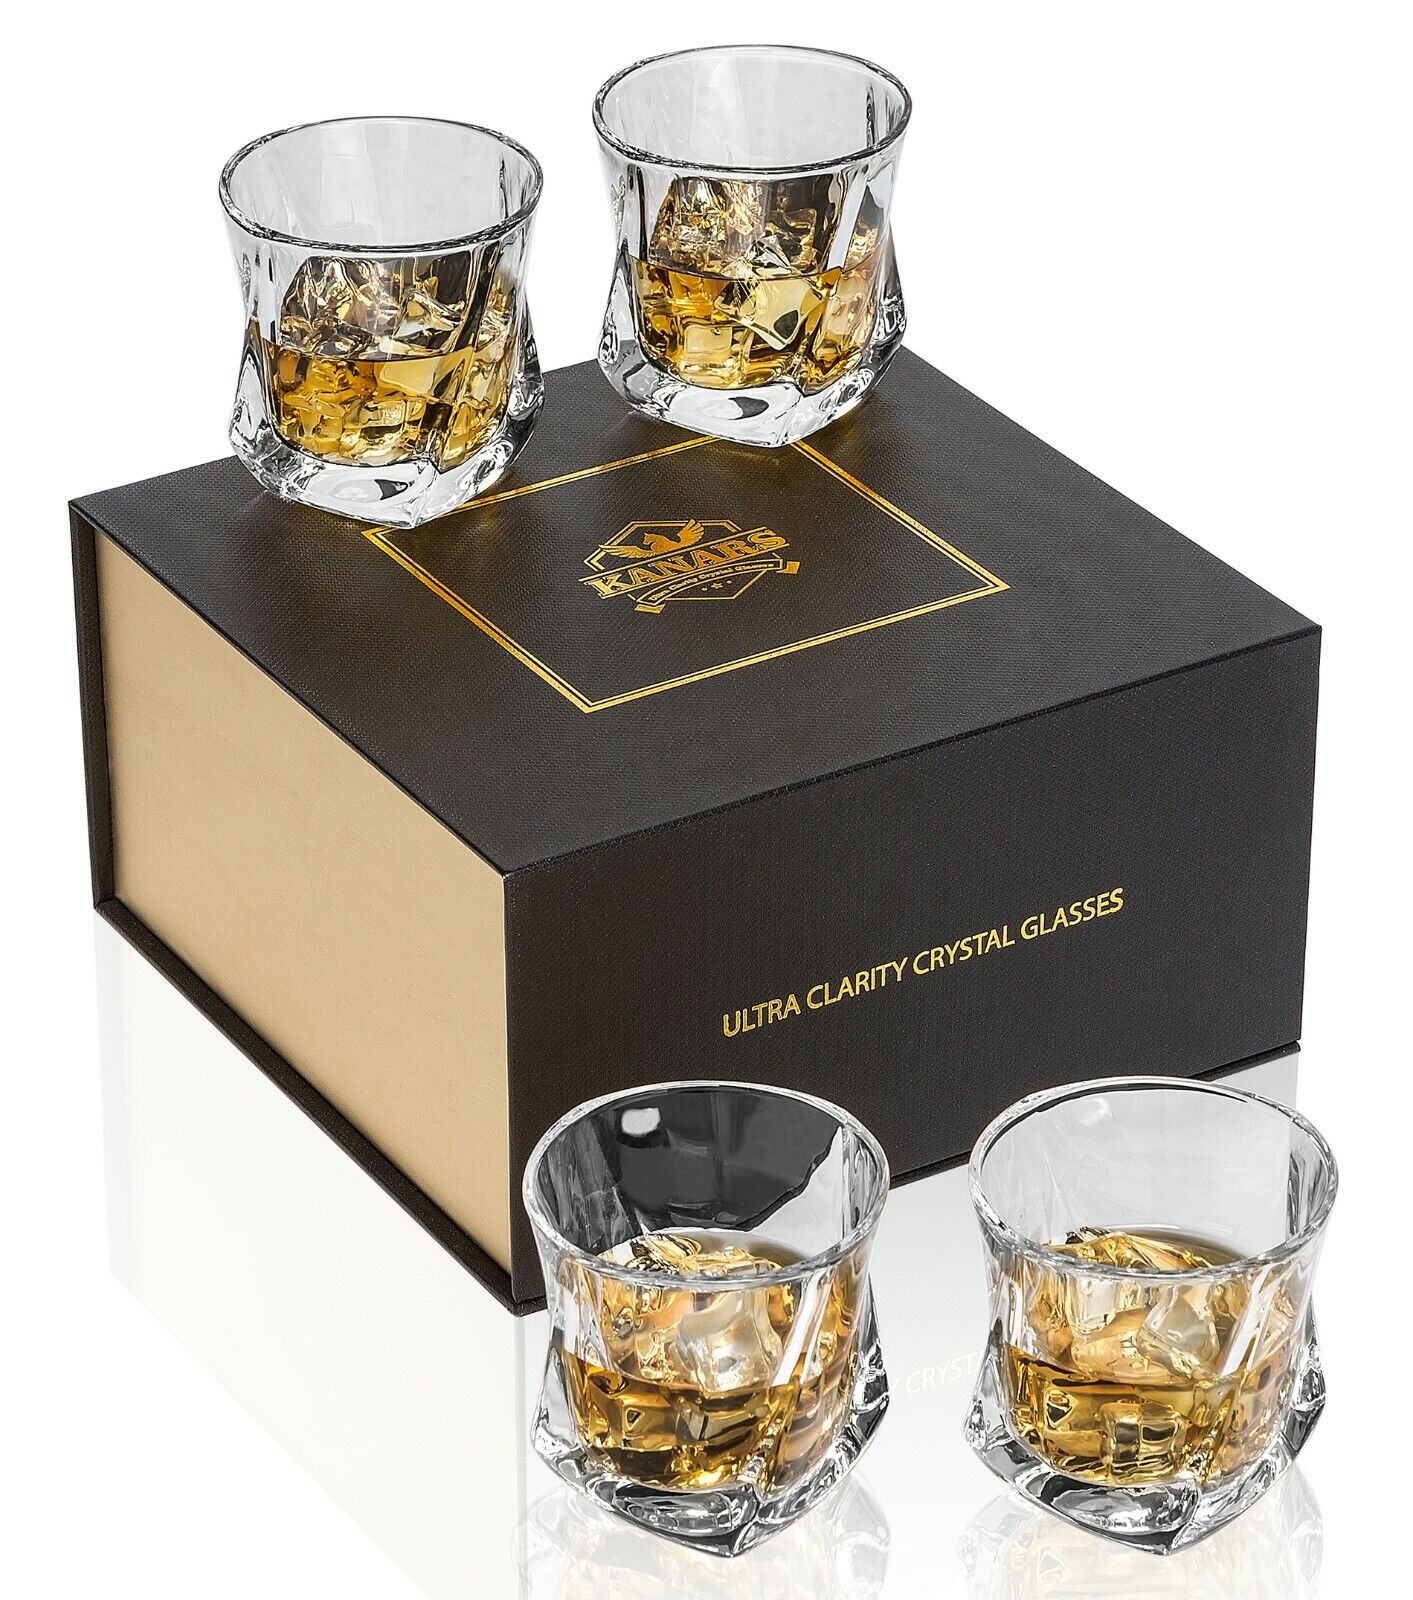 Lowball Whiskey Glasses 4 Pieces Liquor Glass for Rye Cognac Scotch Whisky Vodka